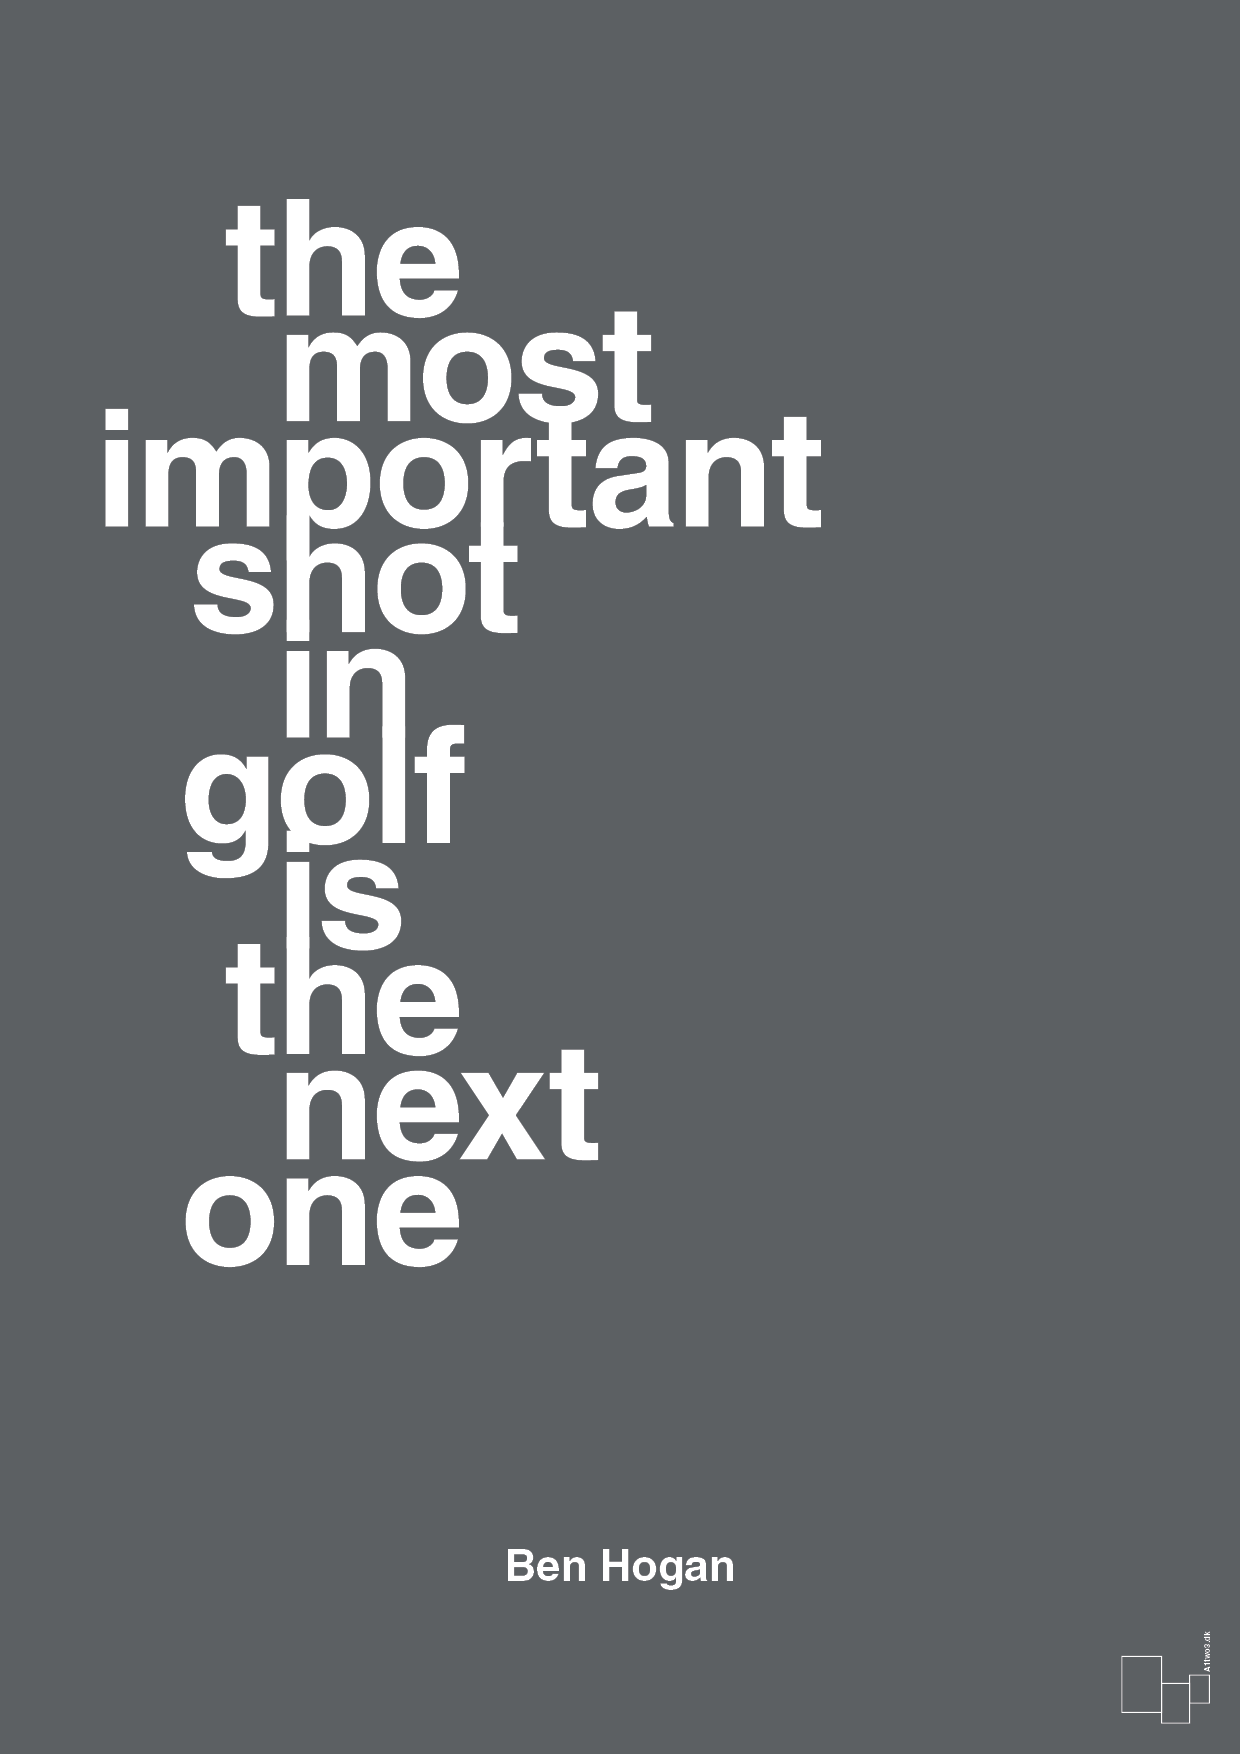 the most important shot in golf is the next one - Plakat med Citater i Graphic Charcoal